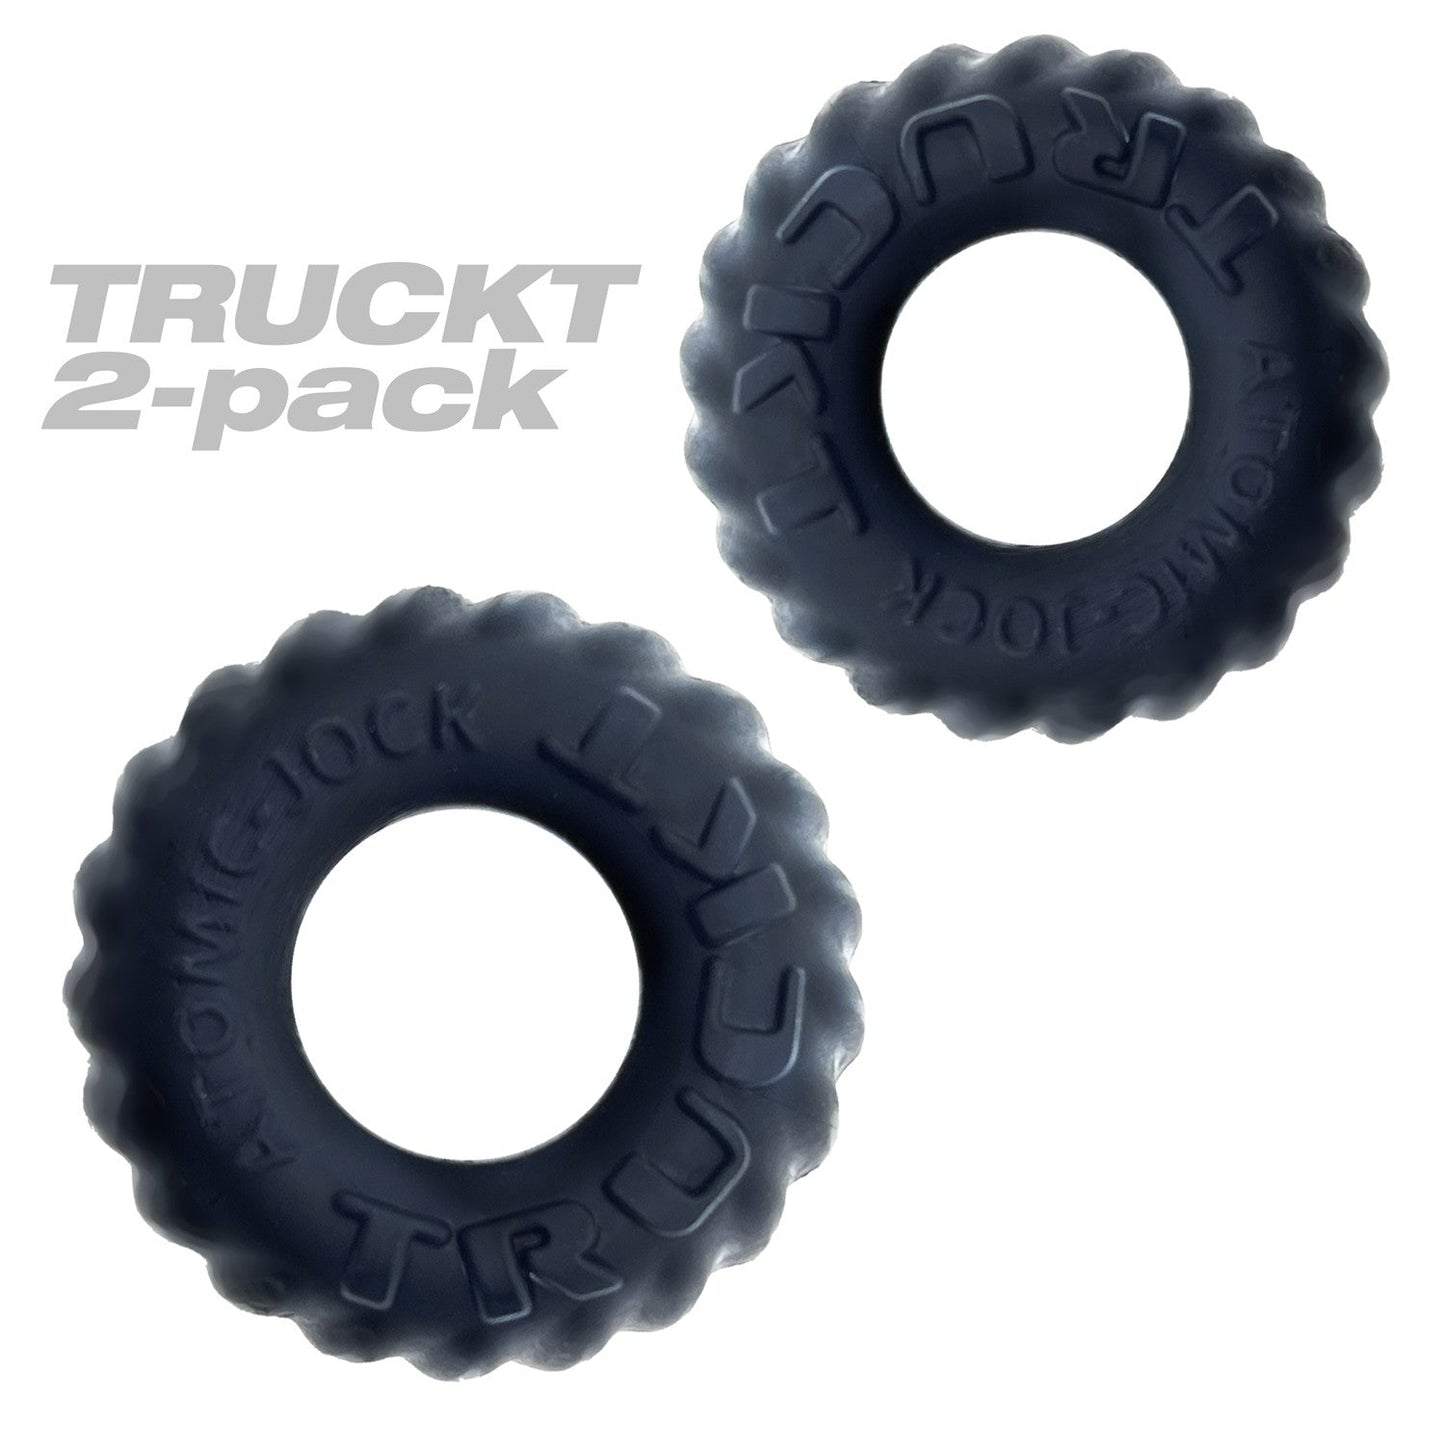 TRUCKT, 2-piece cockring - PLUS+SILICONE special edition - NIGHT